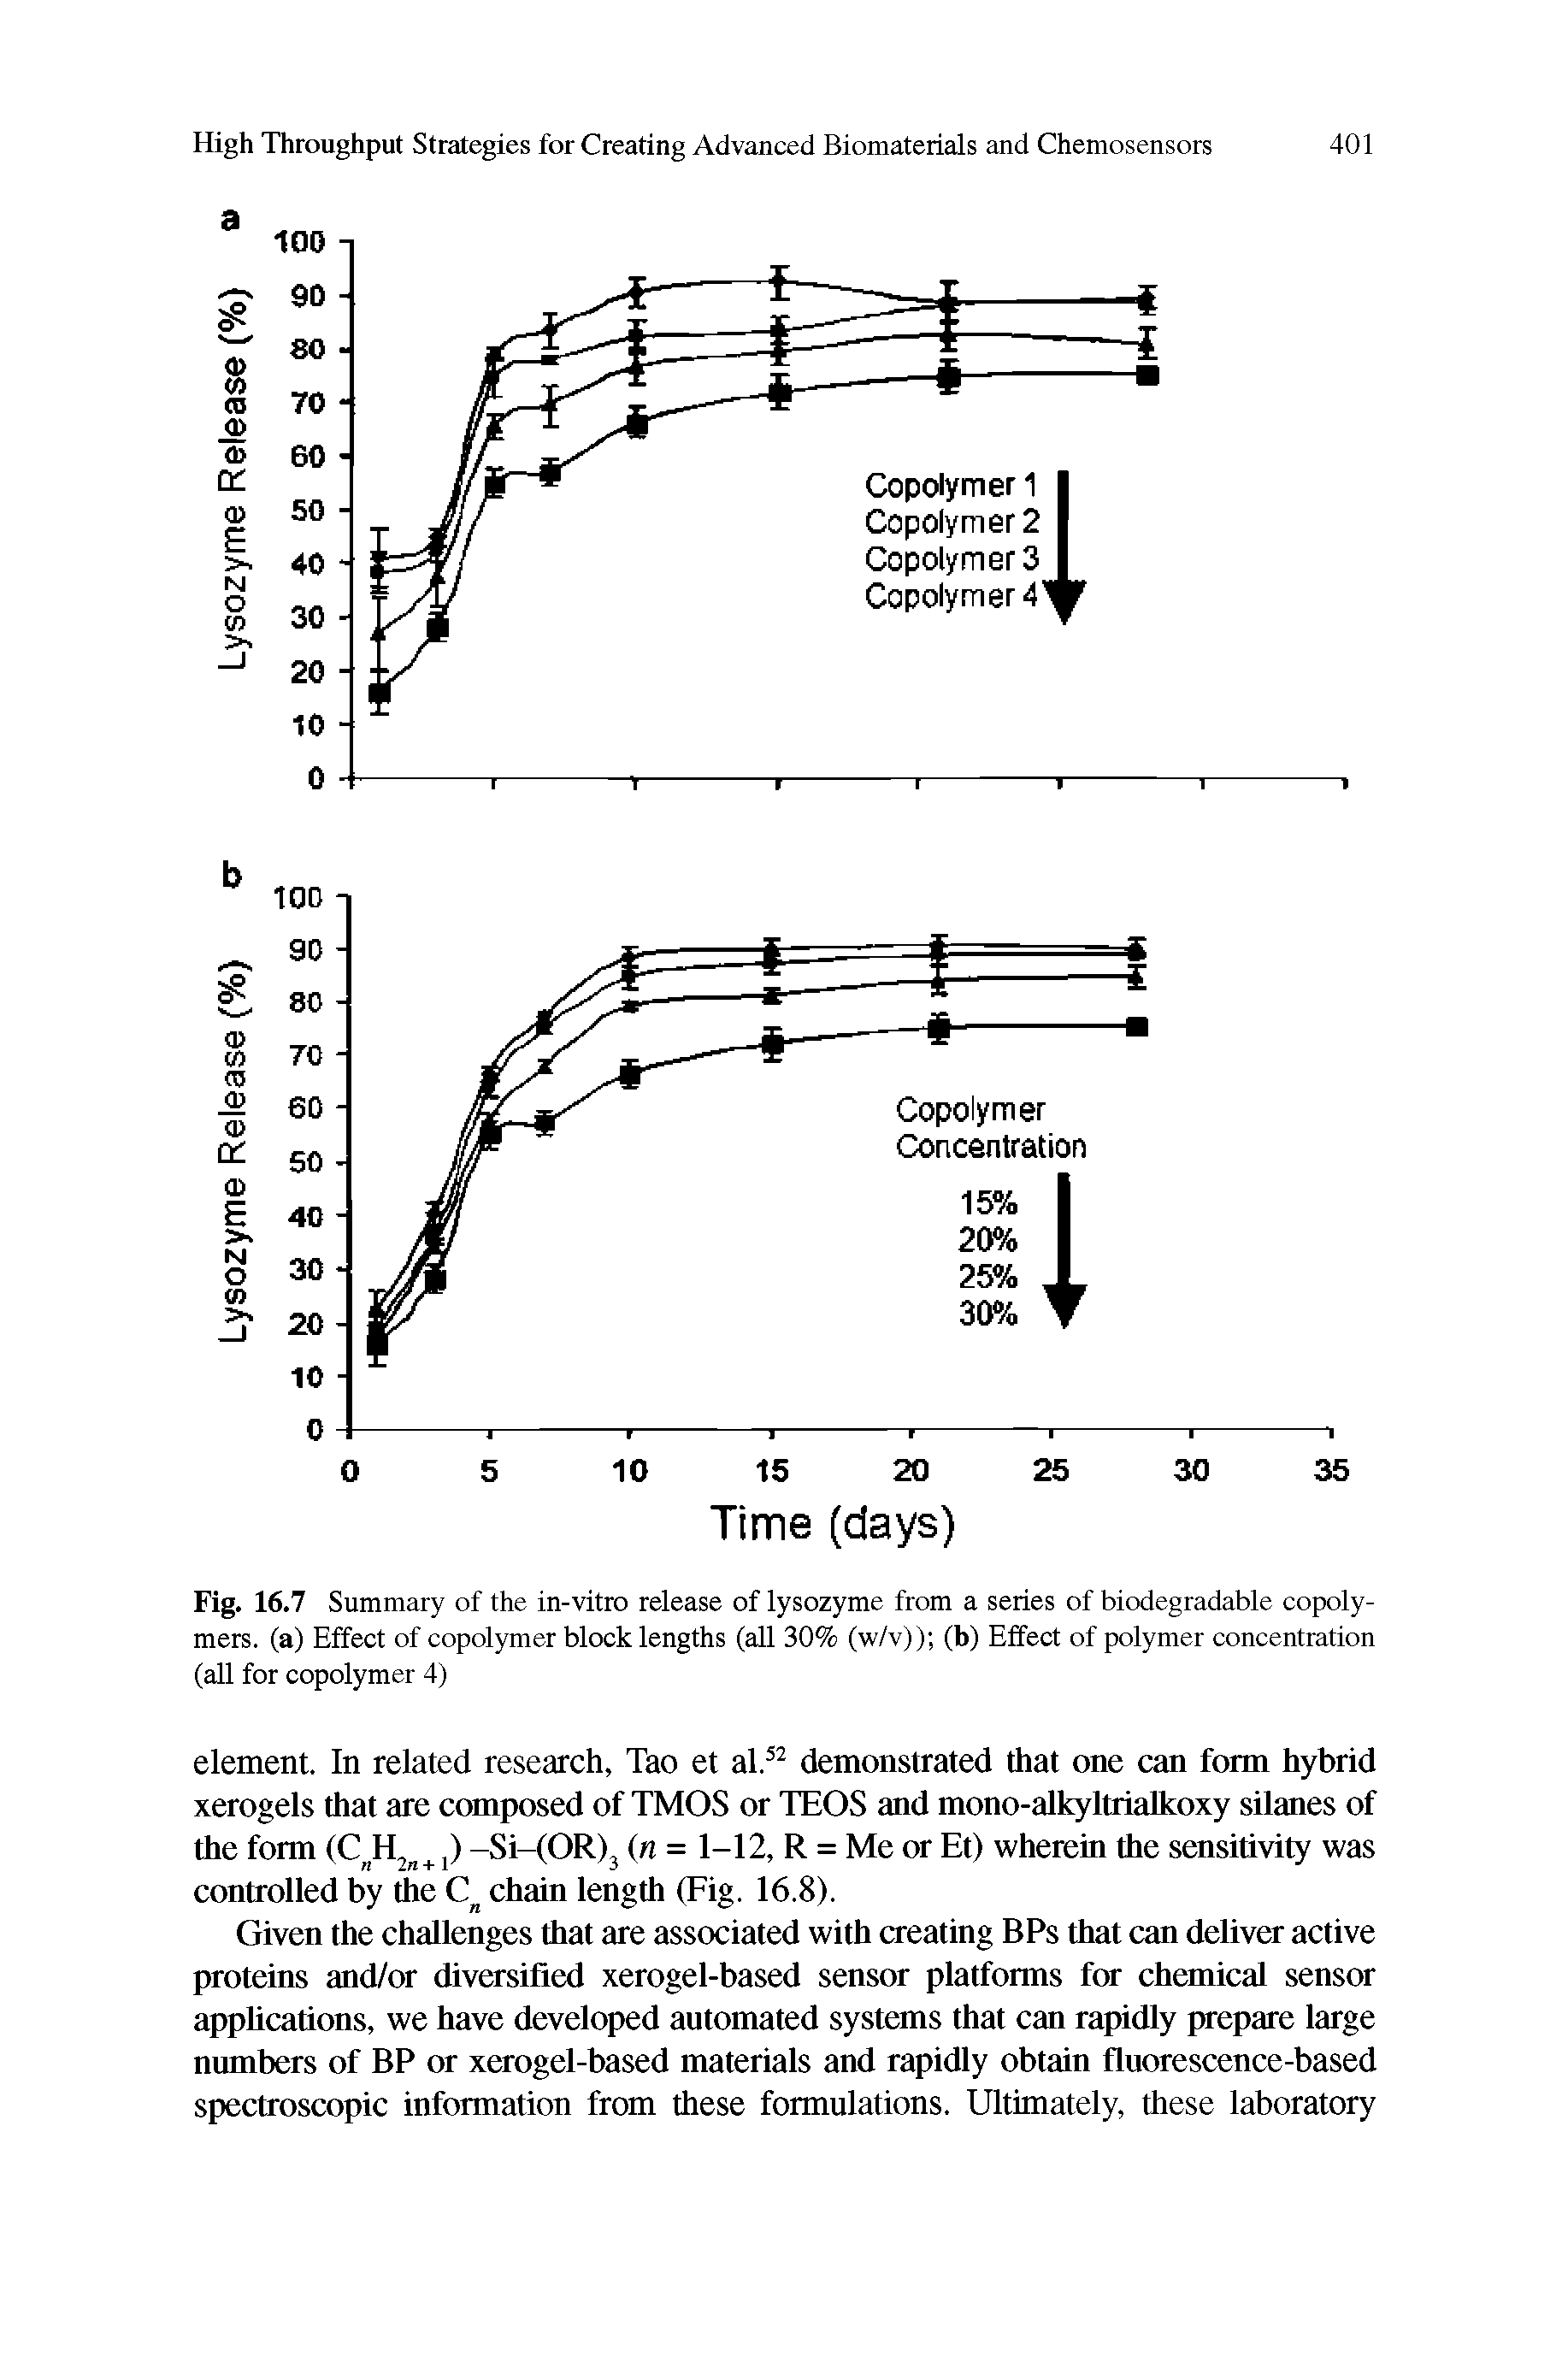 Fig. 16.7 Summary of the in-vitro release of lysozyme from a series of biodegradable copolymers. (a) Effect of copolymer block lengths (all 30% (w/v)) (b) Effect of polymer concentration (all for copolymer 4)...